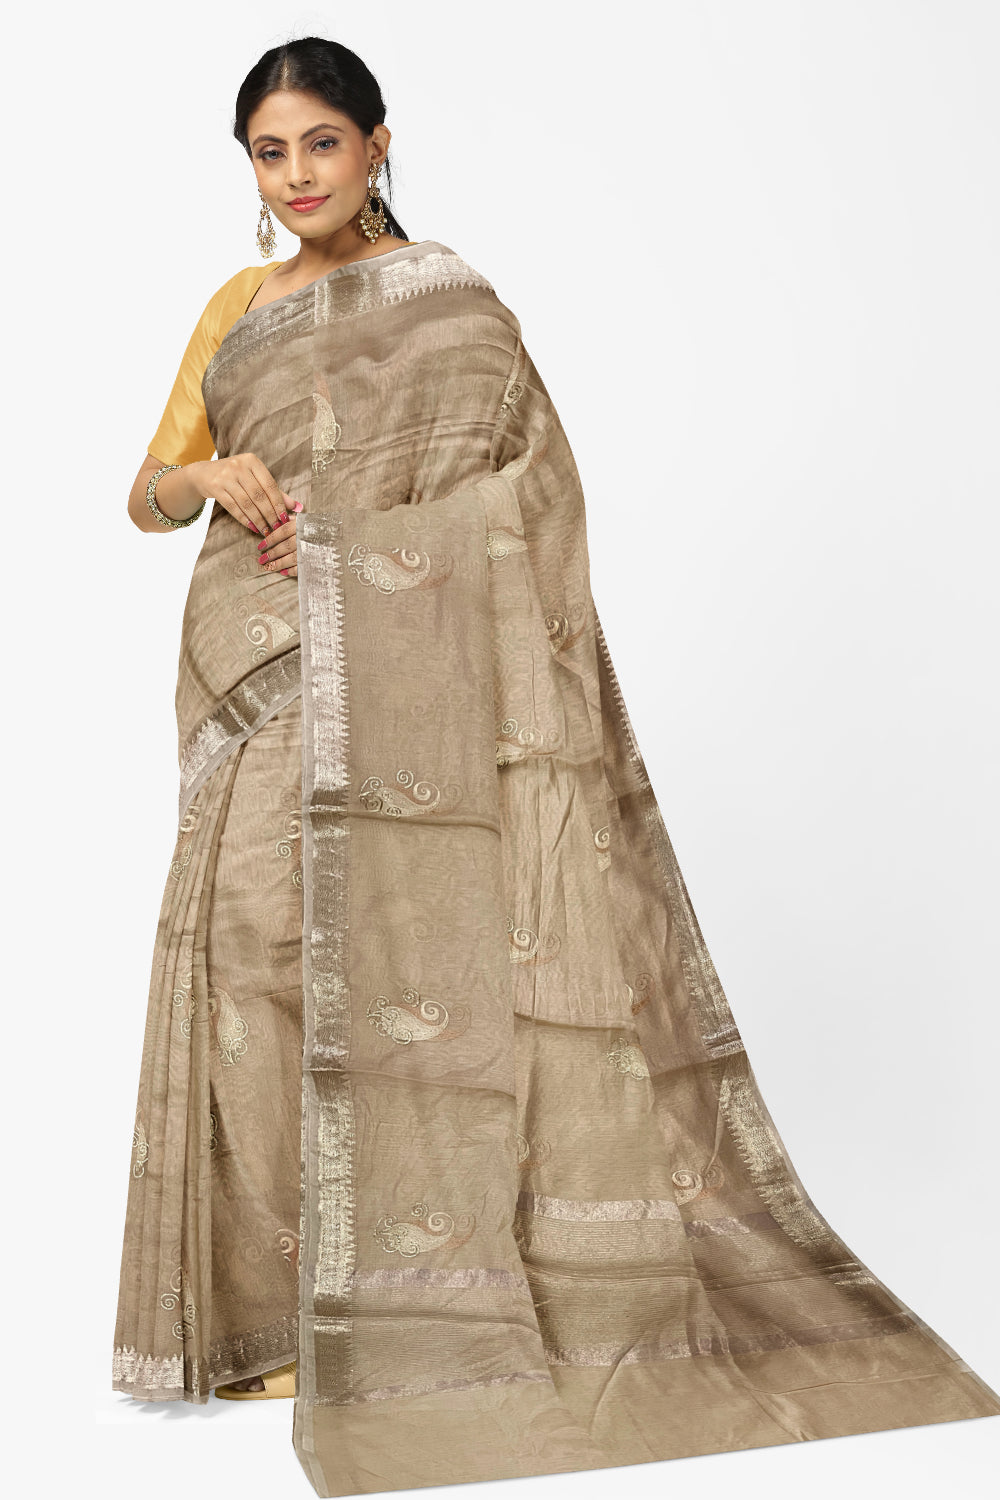 Southloom Cotton Light Brown Saree with Paisley Thread Works